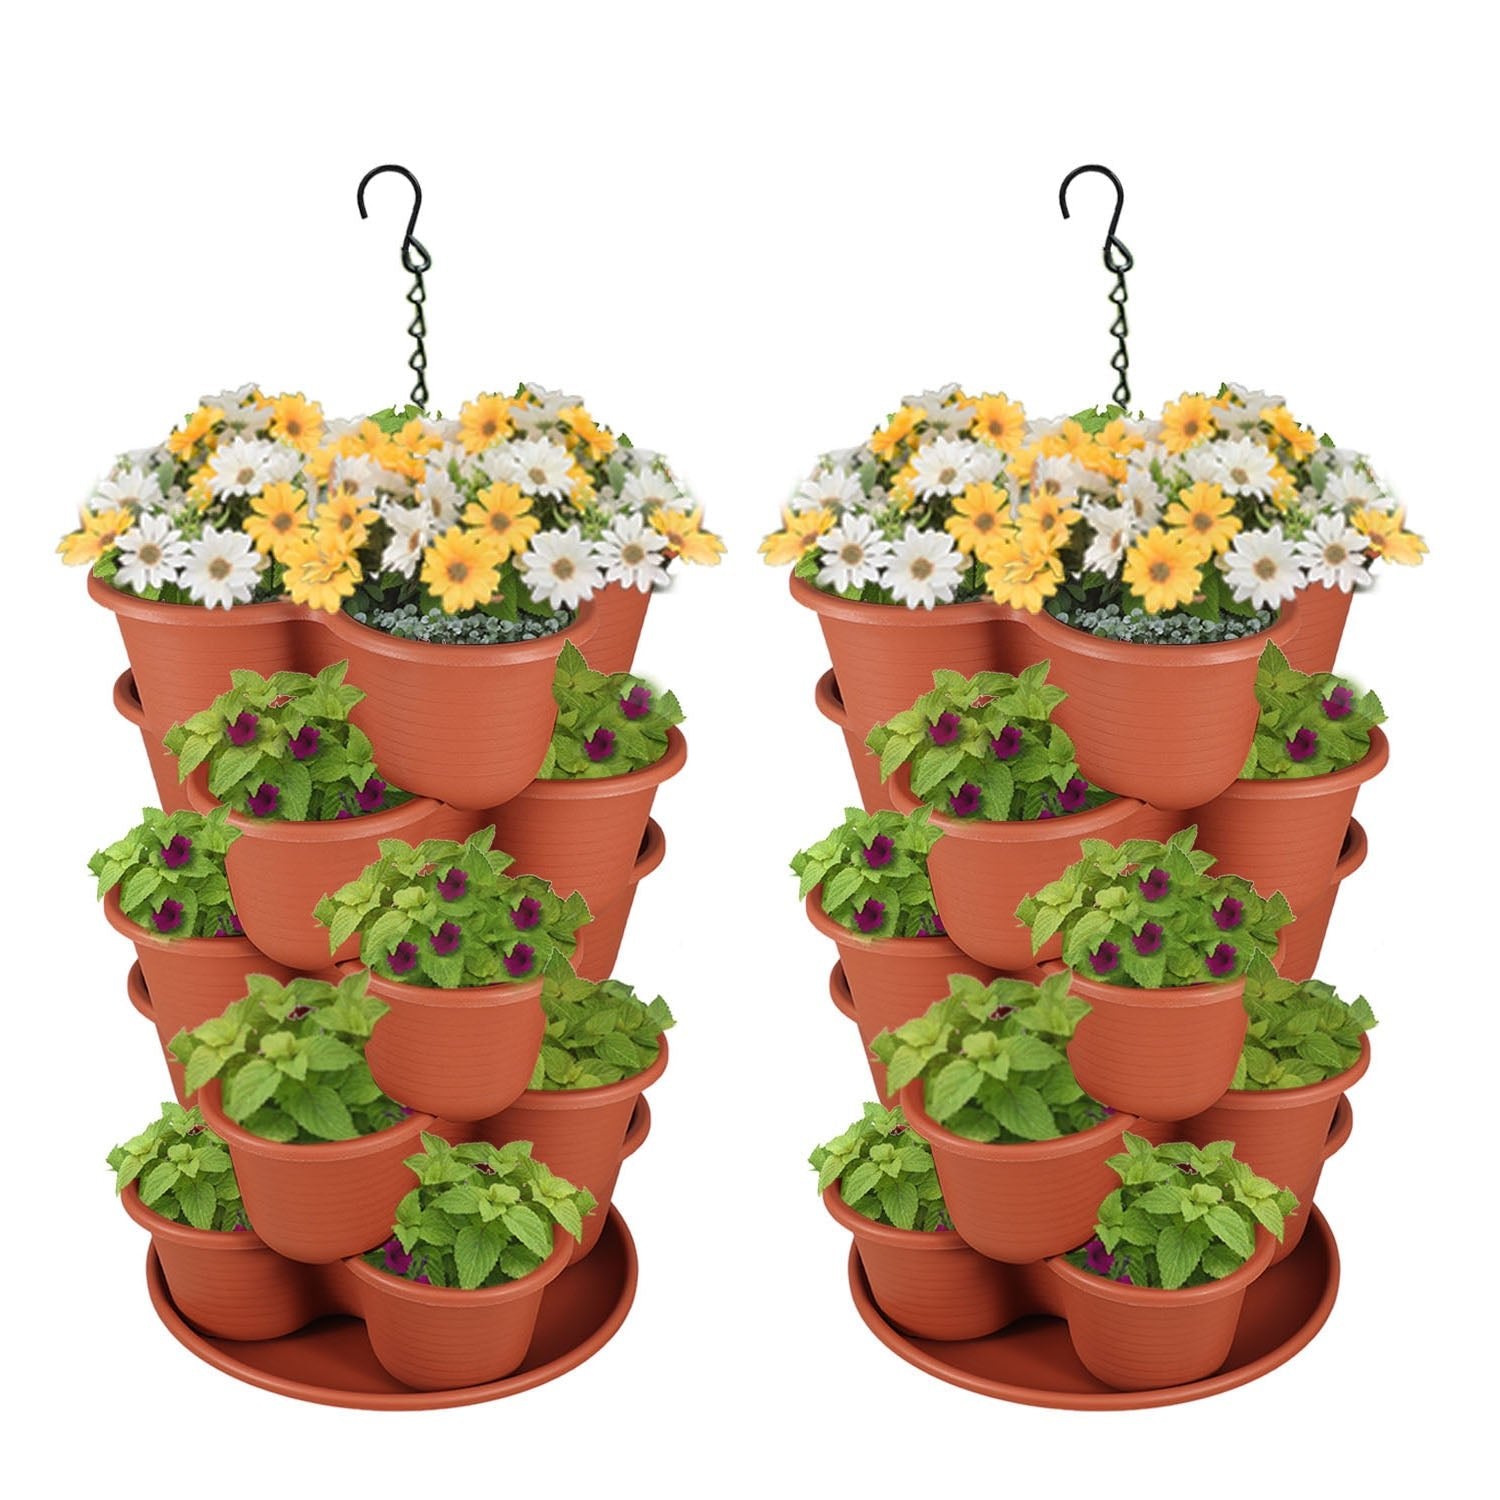 2-Pack of 5-Tier Stackable Planter Vertical, Tower Garden Planters for Strawberries, Flowers, Herbs, Vegetables, 5-Tier Growing System for Indoor and Outdoor Use - Aoodor